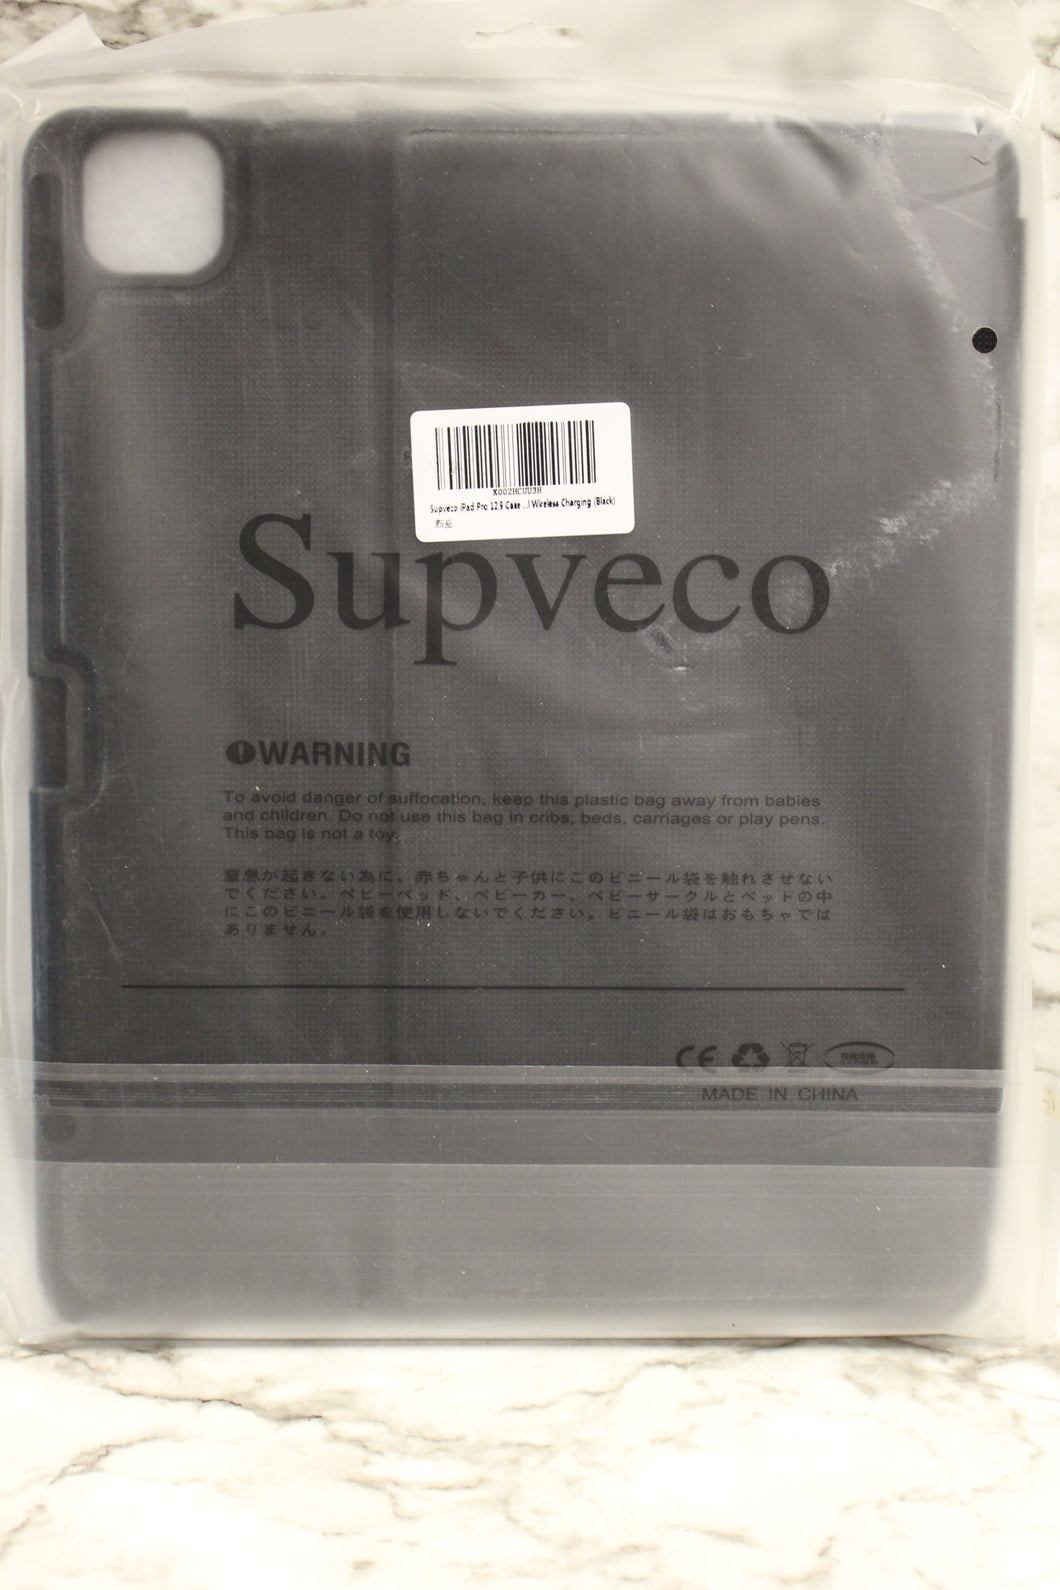 Supveco iPad Pro Protective Case For Drop Protection -Black -New